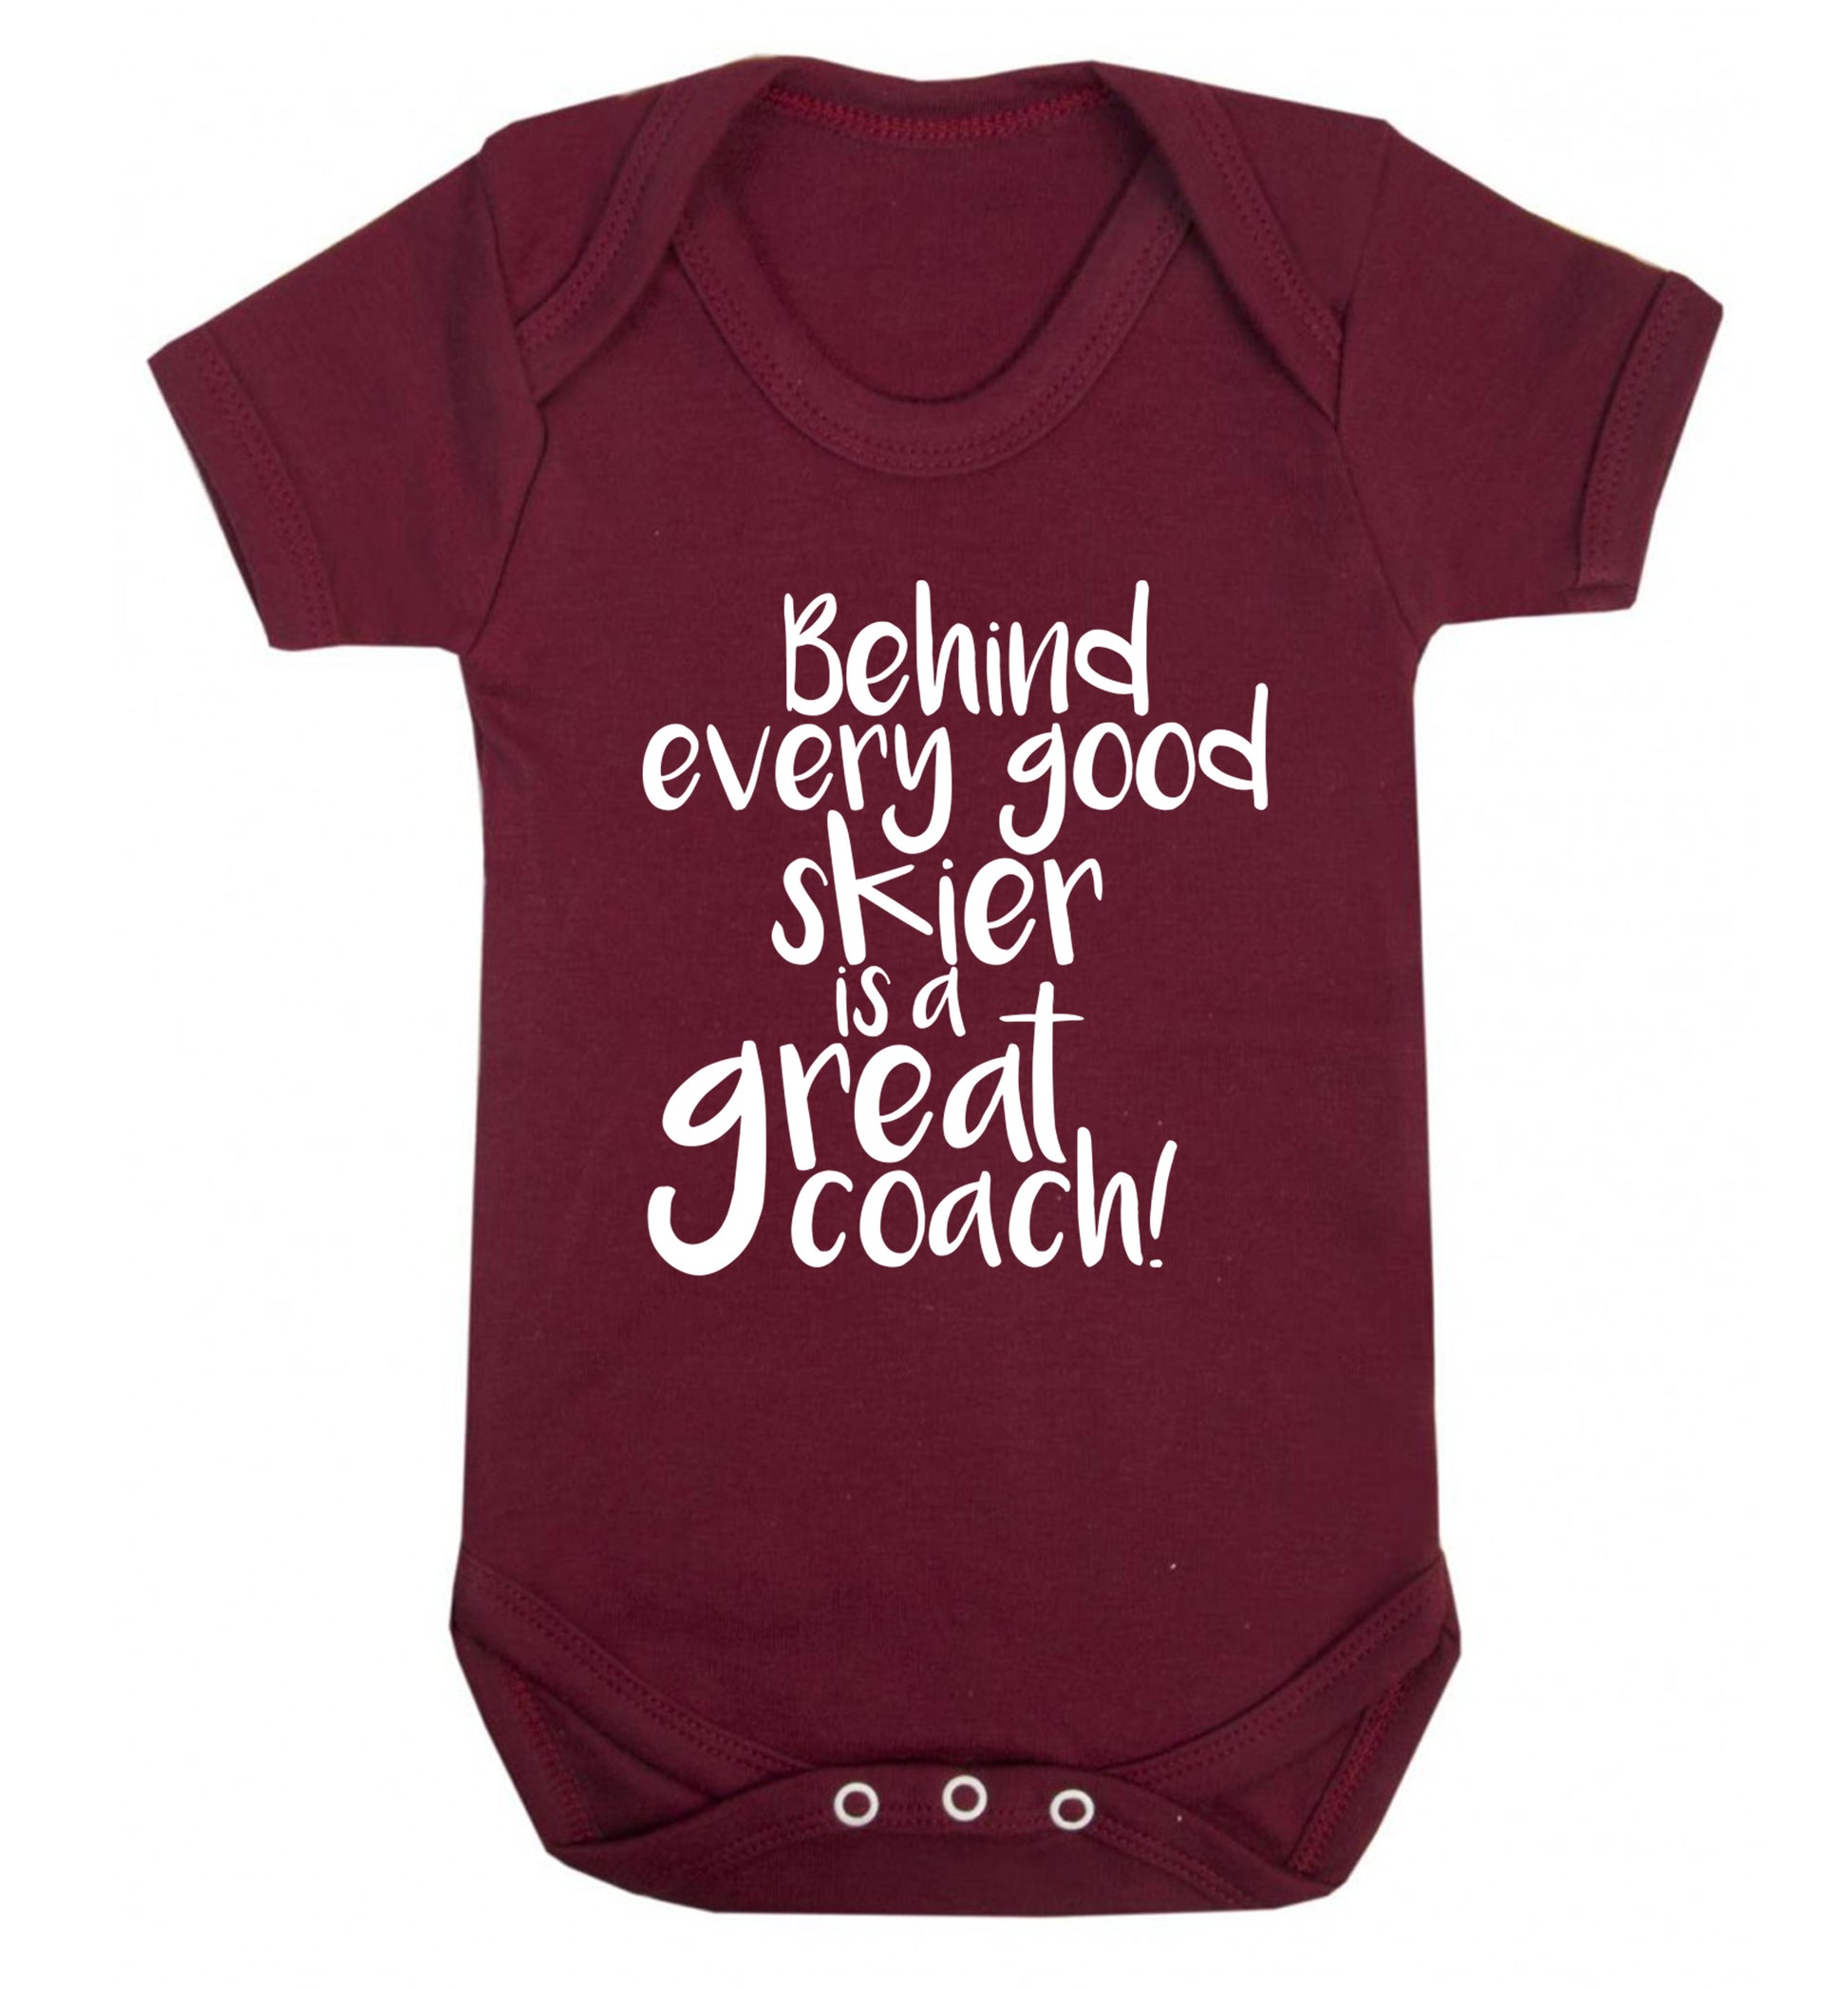 Behind every good skier is a great coach! Baby Vest maroon 18-24 months